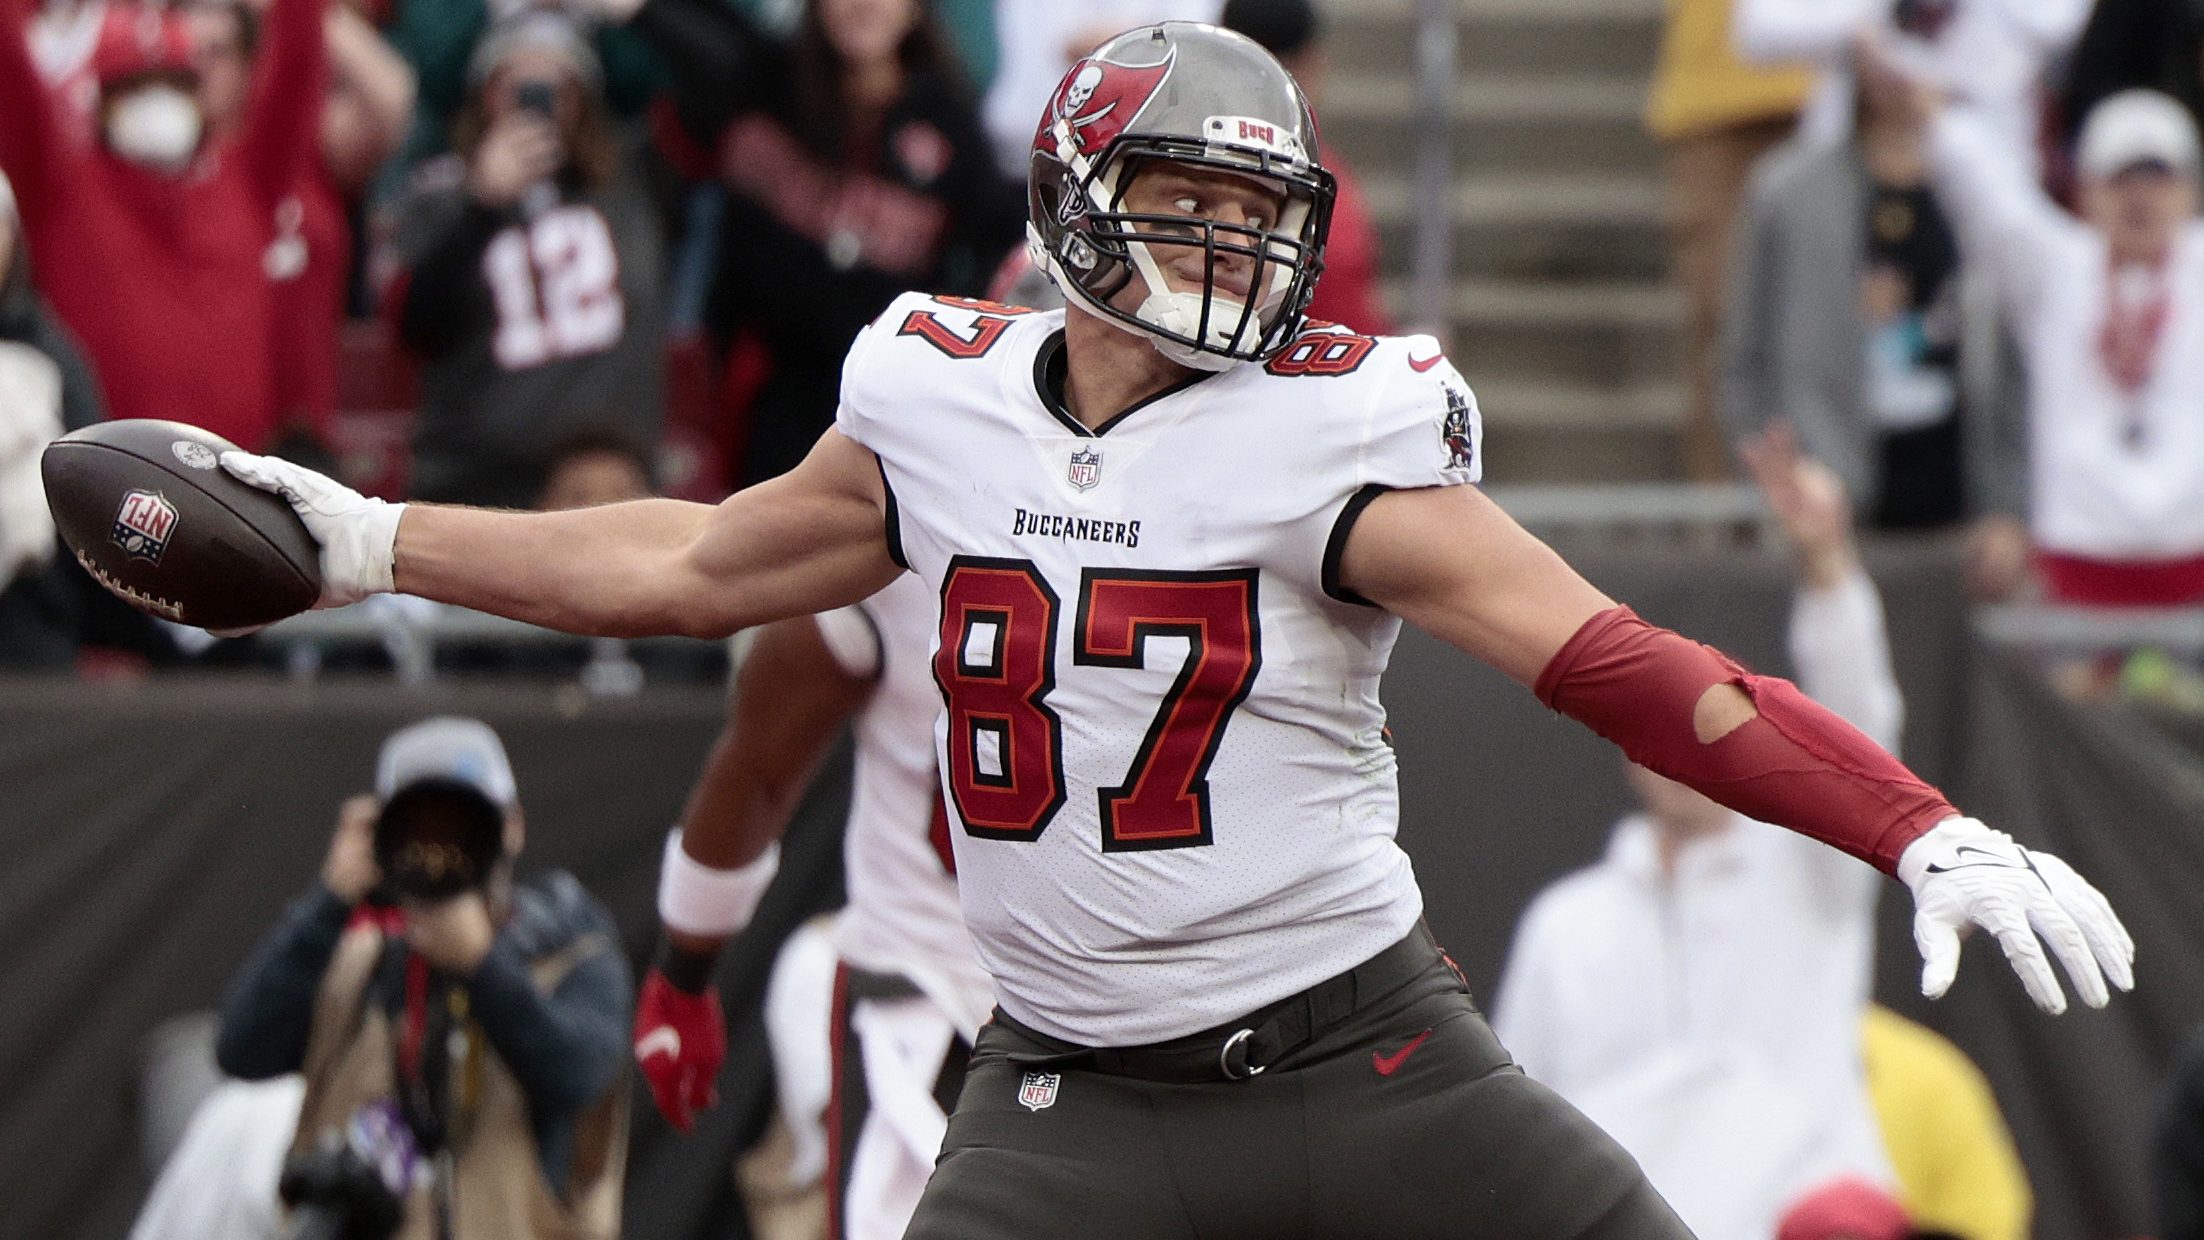 Rob Gronkowski says he will only play for Buccaneers if he decides